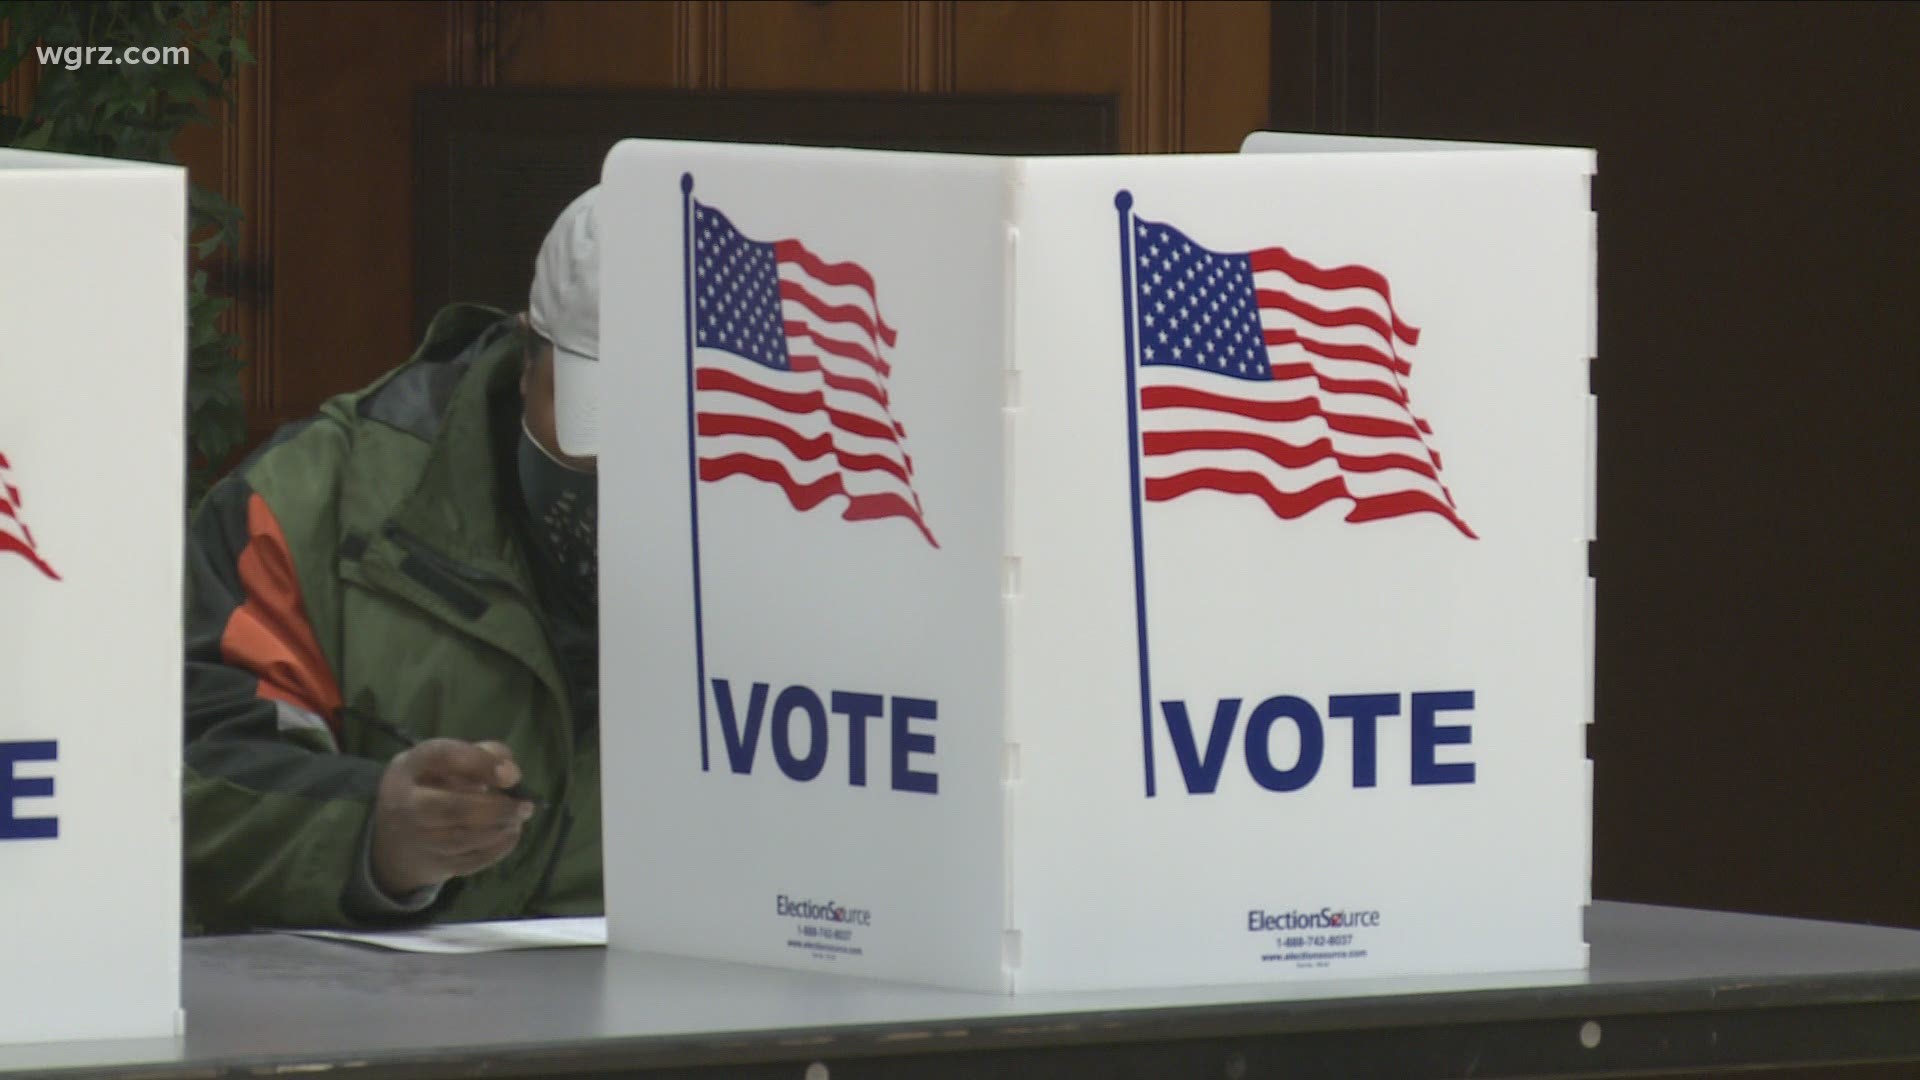 Tens of thousands of Western New Yorker's have already cast their ballots. Long lines have been reported in several areas, especially in Niagara County.